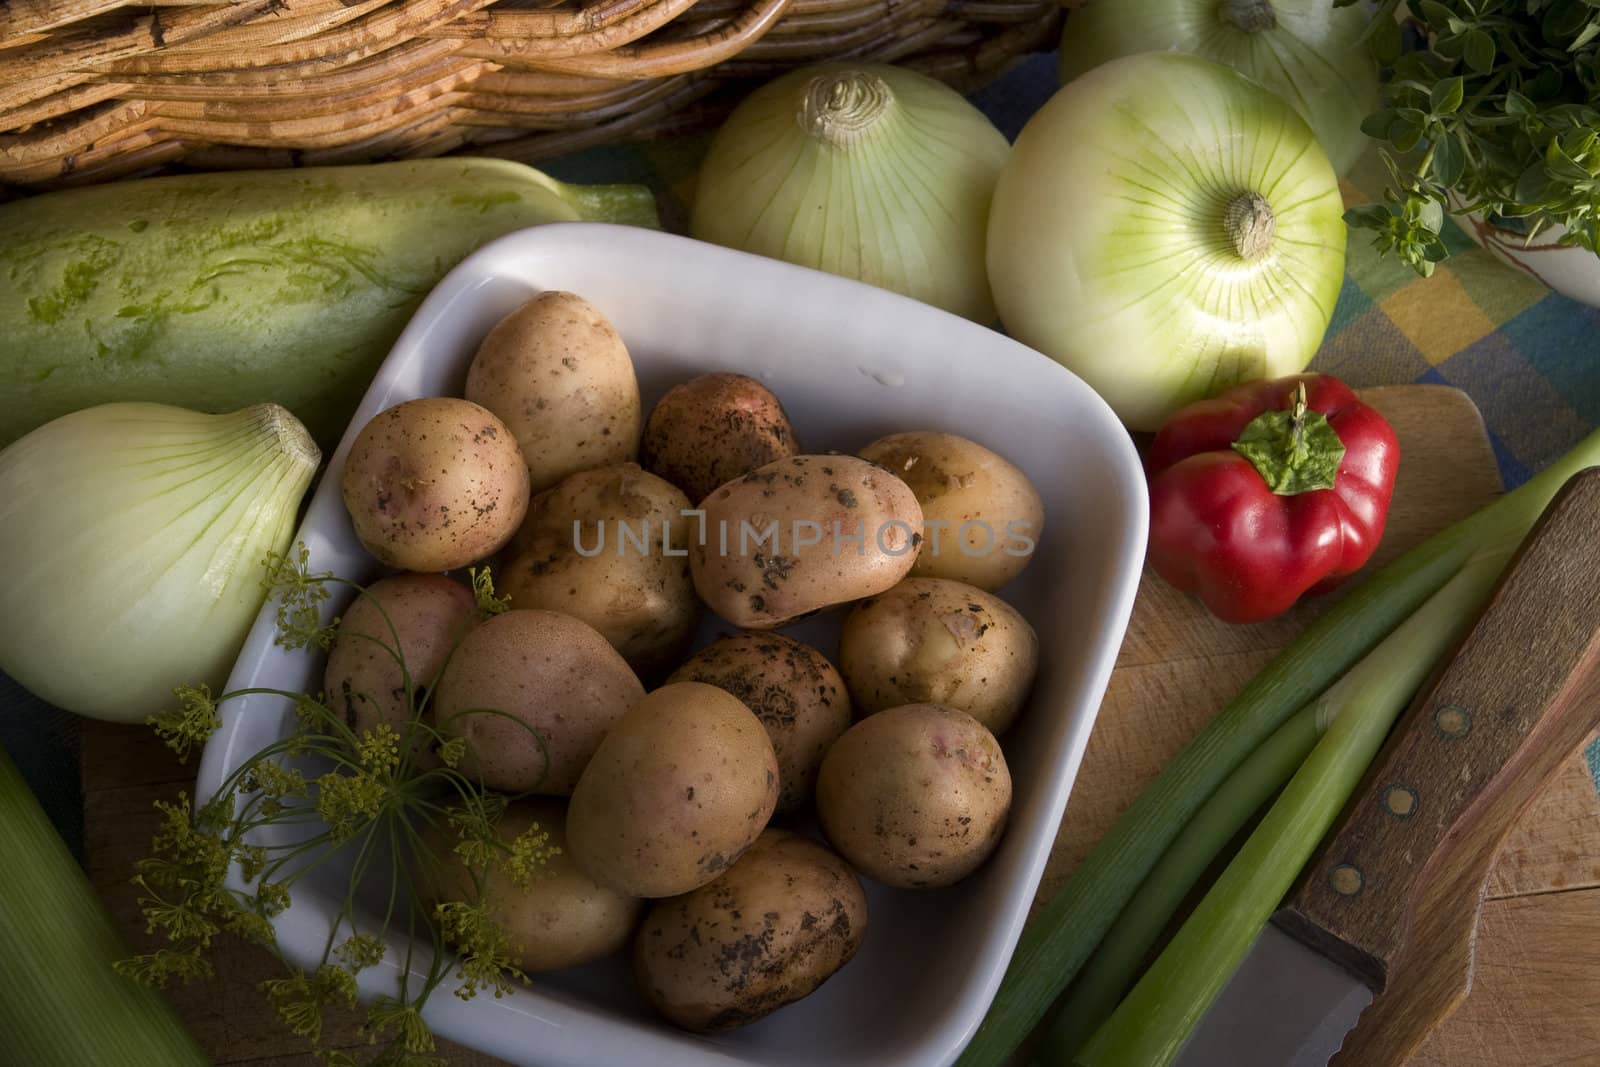 Dish of young, fresh potatoes and other vegetables on the rustic desk